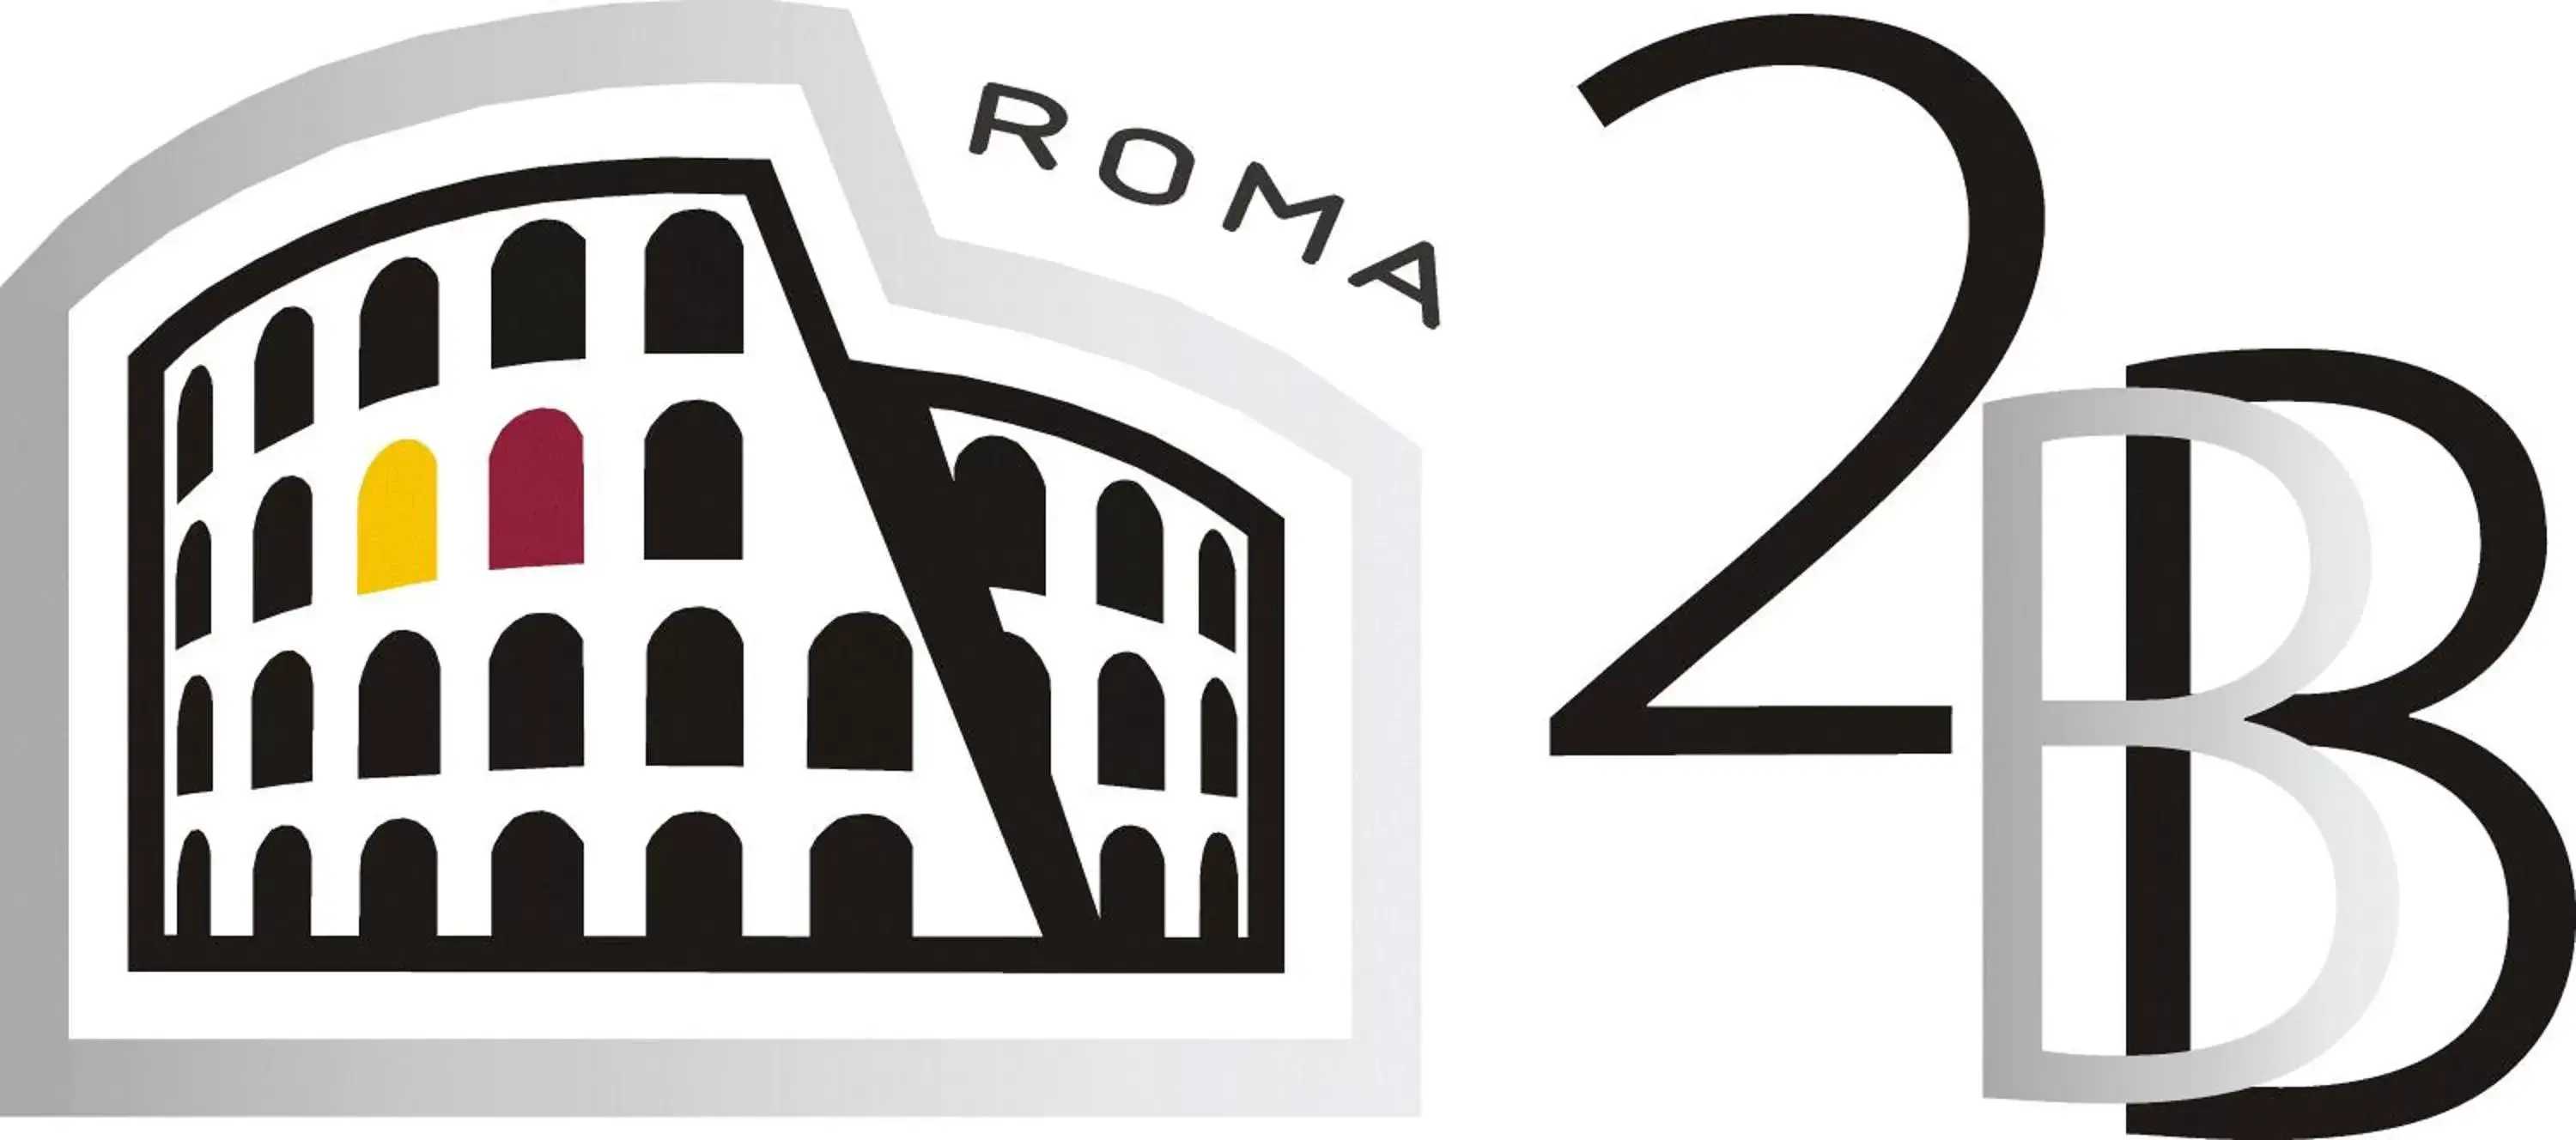 Property logo or sign in Roma 2B